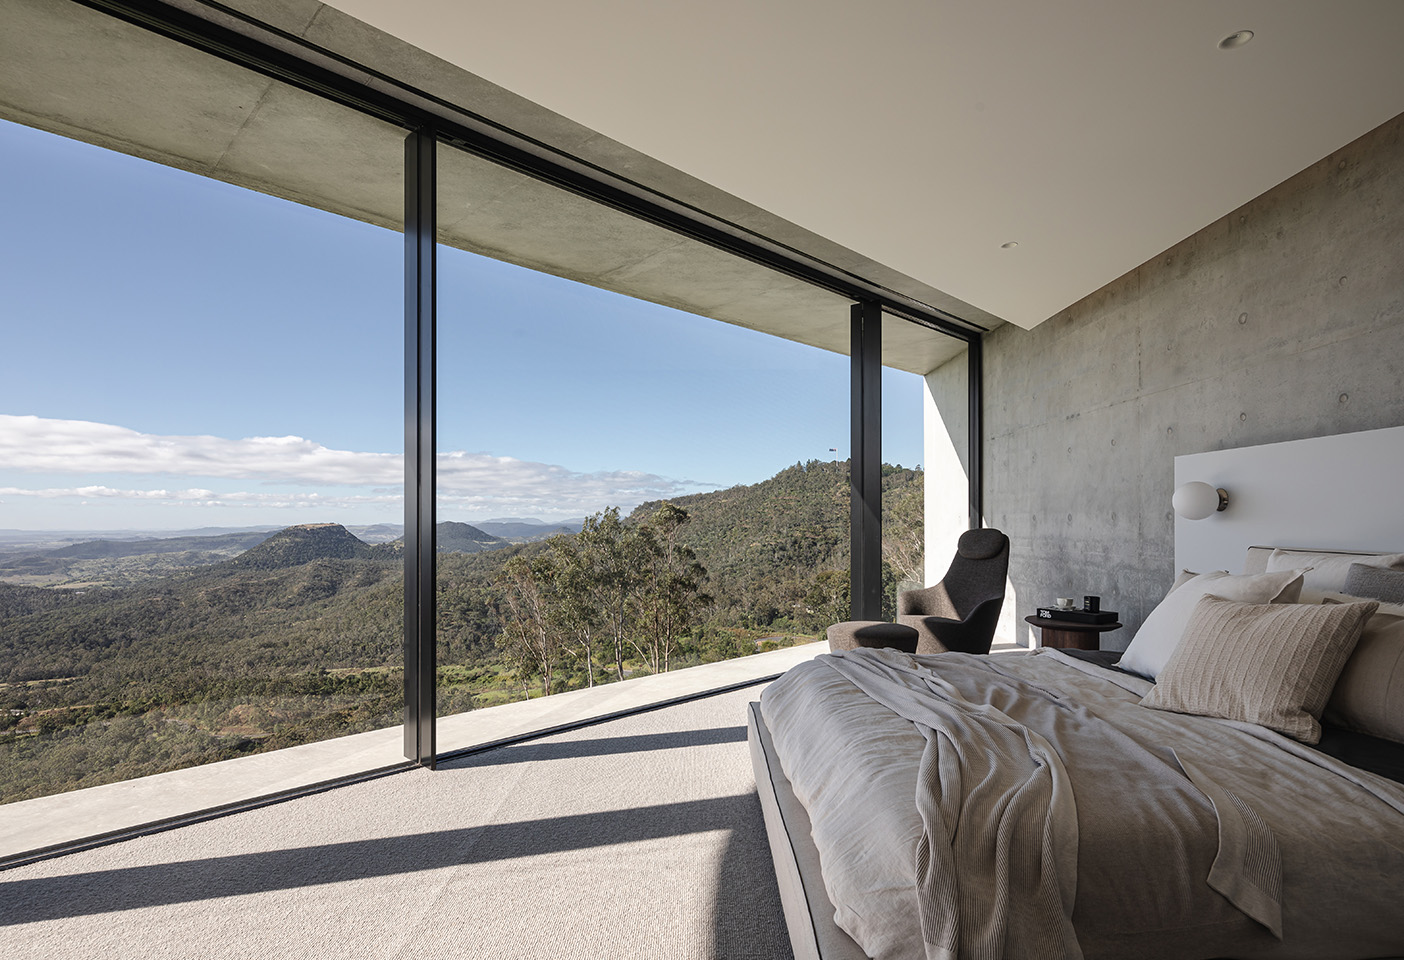 The master bedroom soaks in views of Tabletop Mountain. Photo © Cam Murchison.